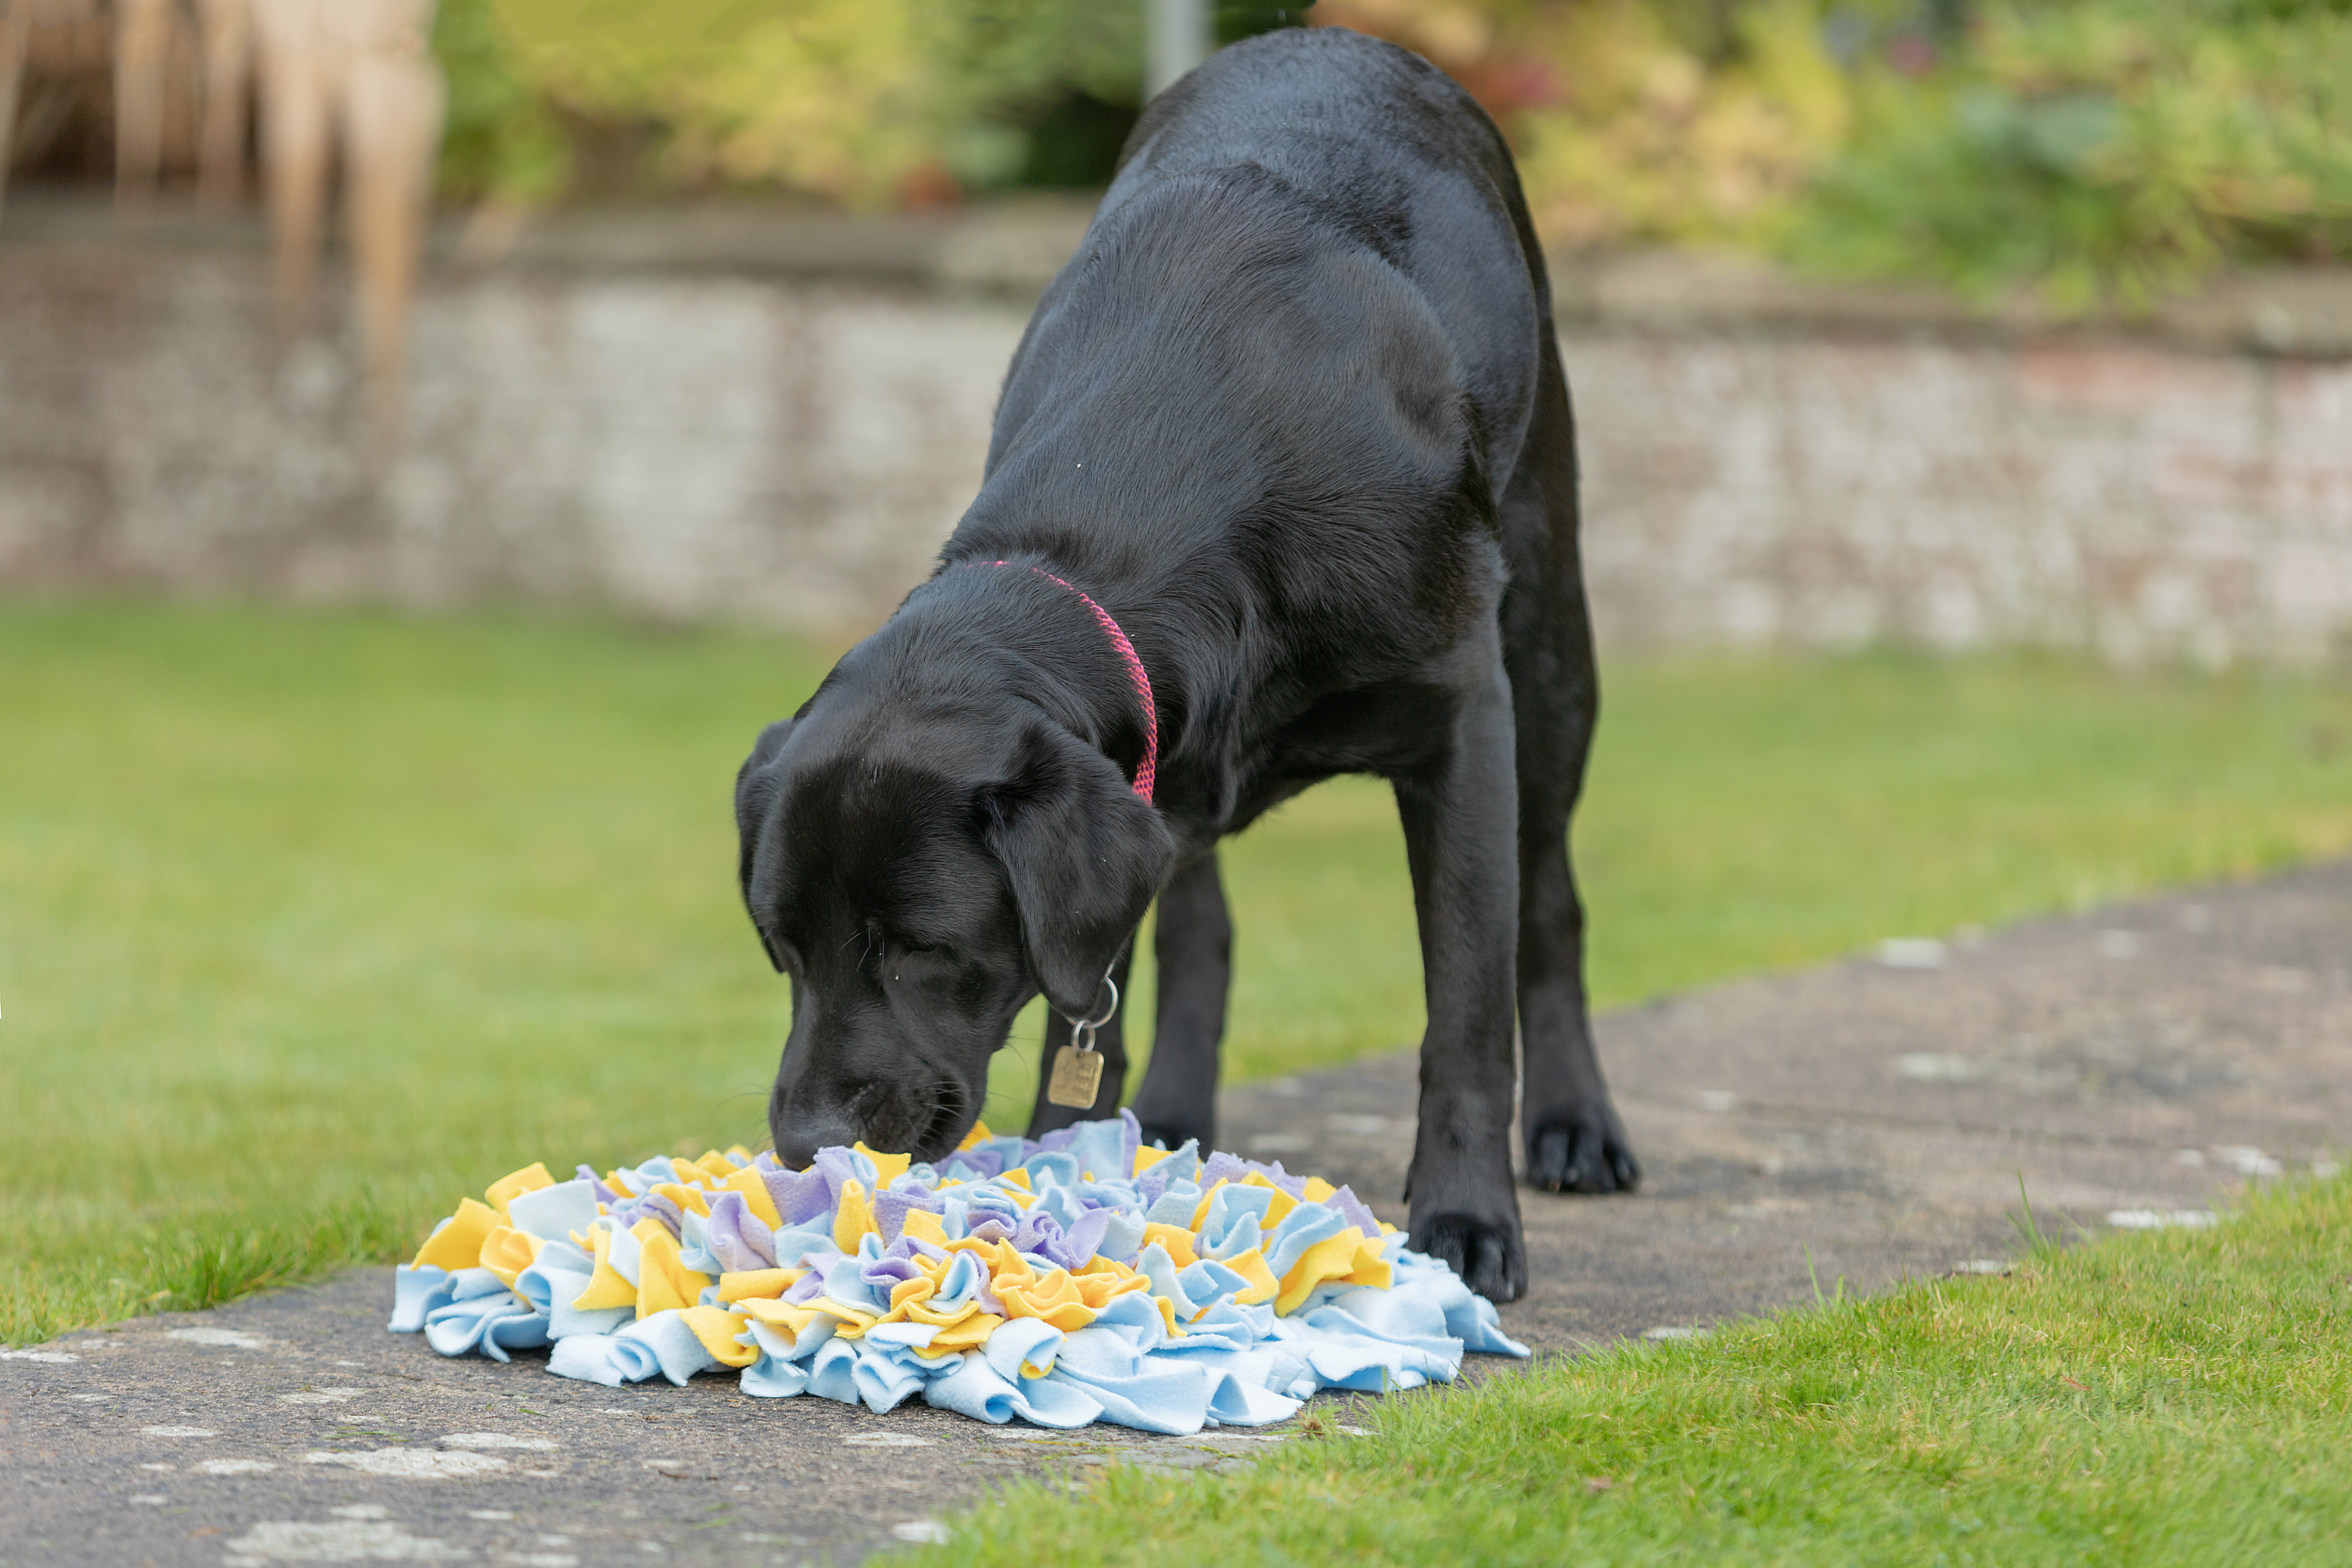 Black Labrador searches for treats in colourful snuffle mat on a garden path